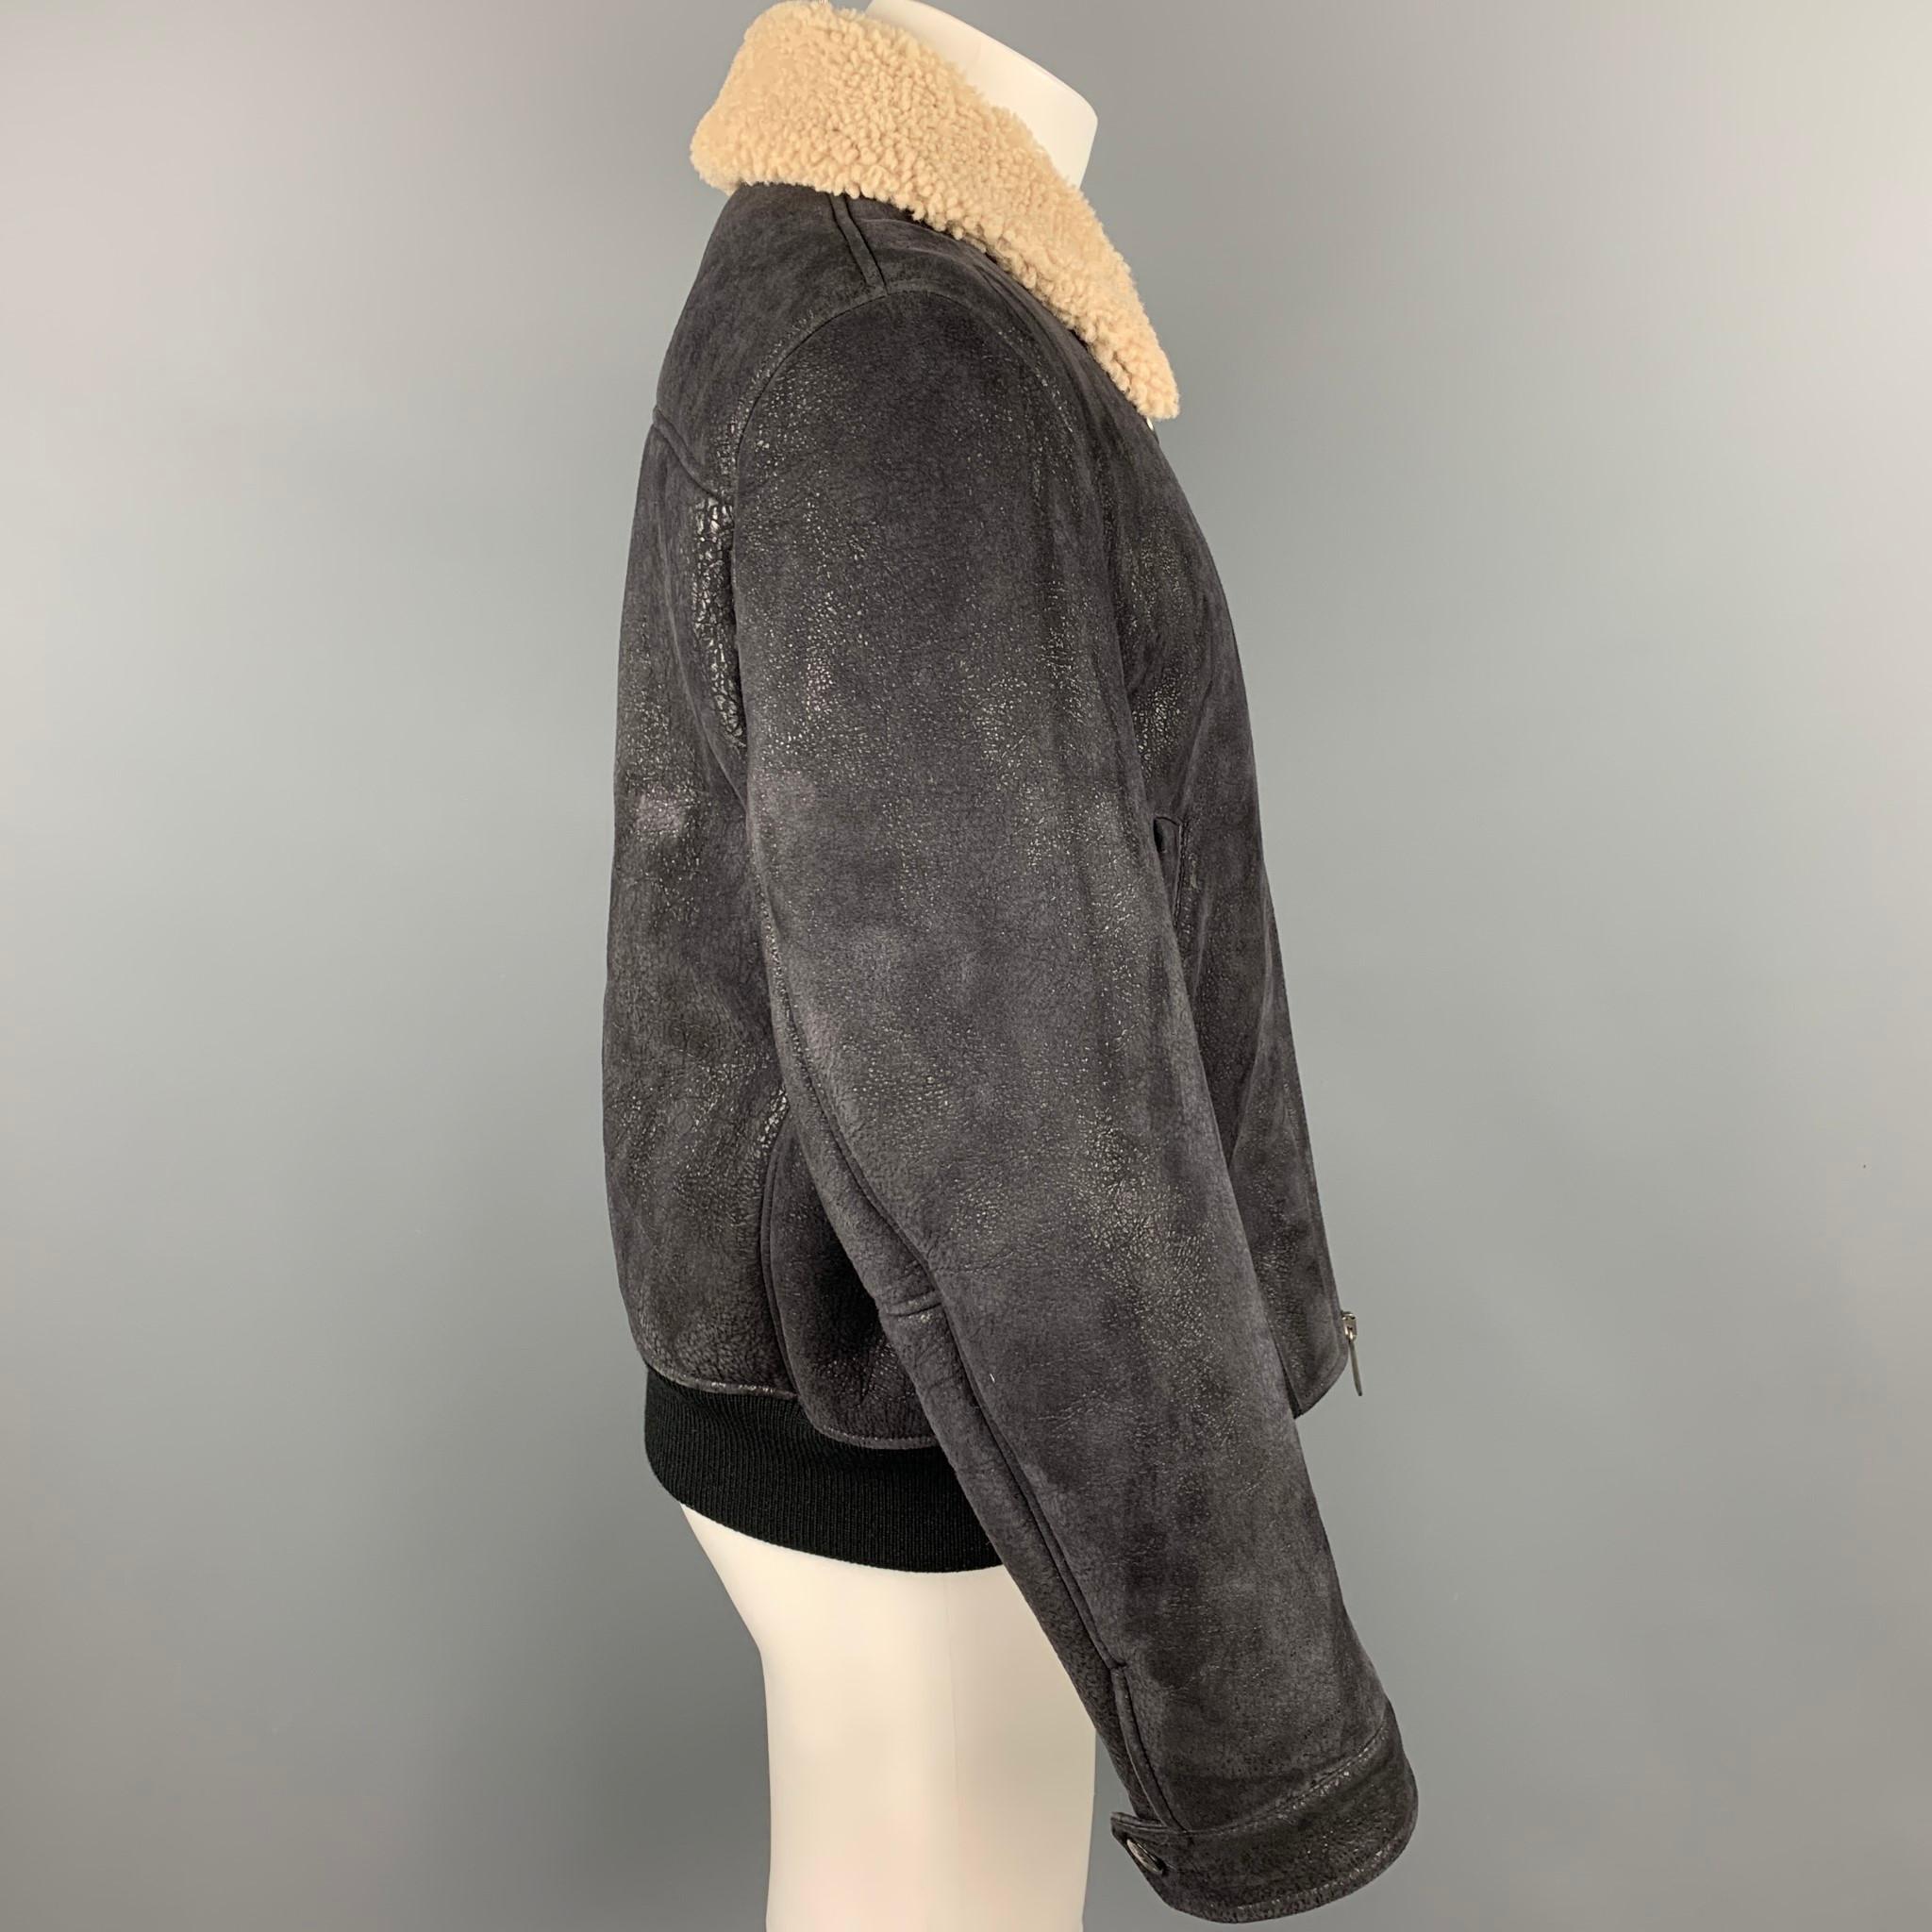 NEIL BARRETT jacket comes in a black textured lambskin featuring a skinny fit, fur collar, ribbed hem, slit pockets, anda full zip up closure. Made in Italy.

Very Good Pre-Owned Condition.
Marked: L

Measurements:

Shoulder: 17.5 in.
Chest: 44